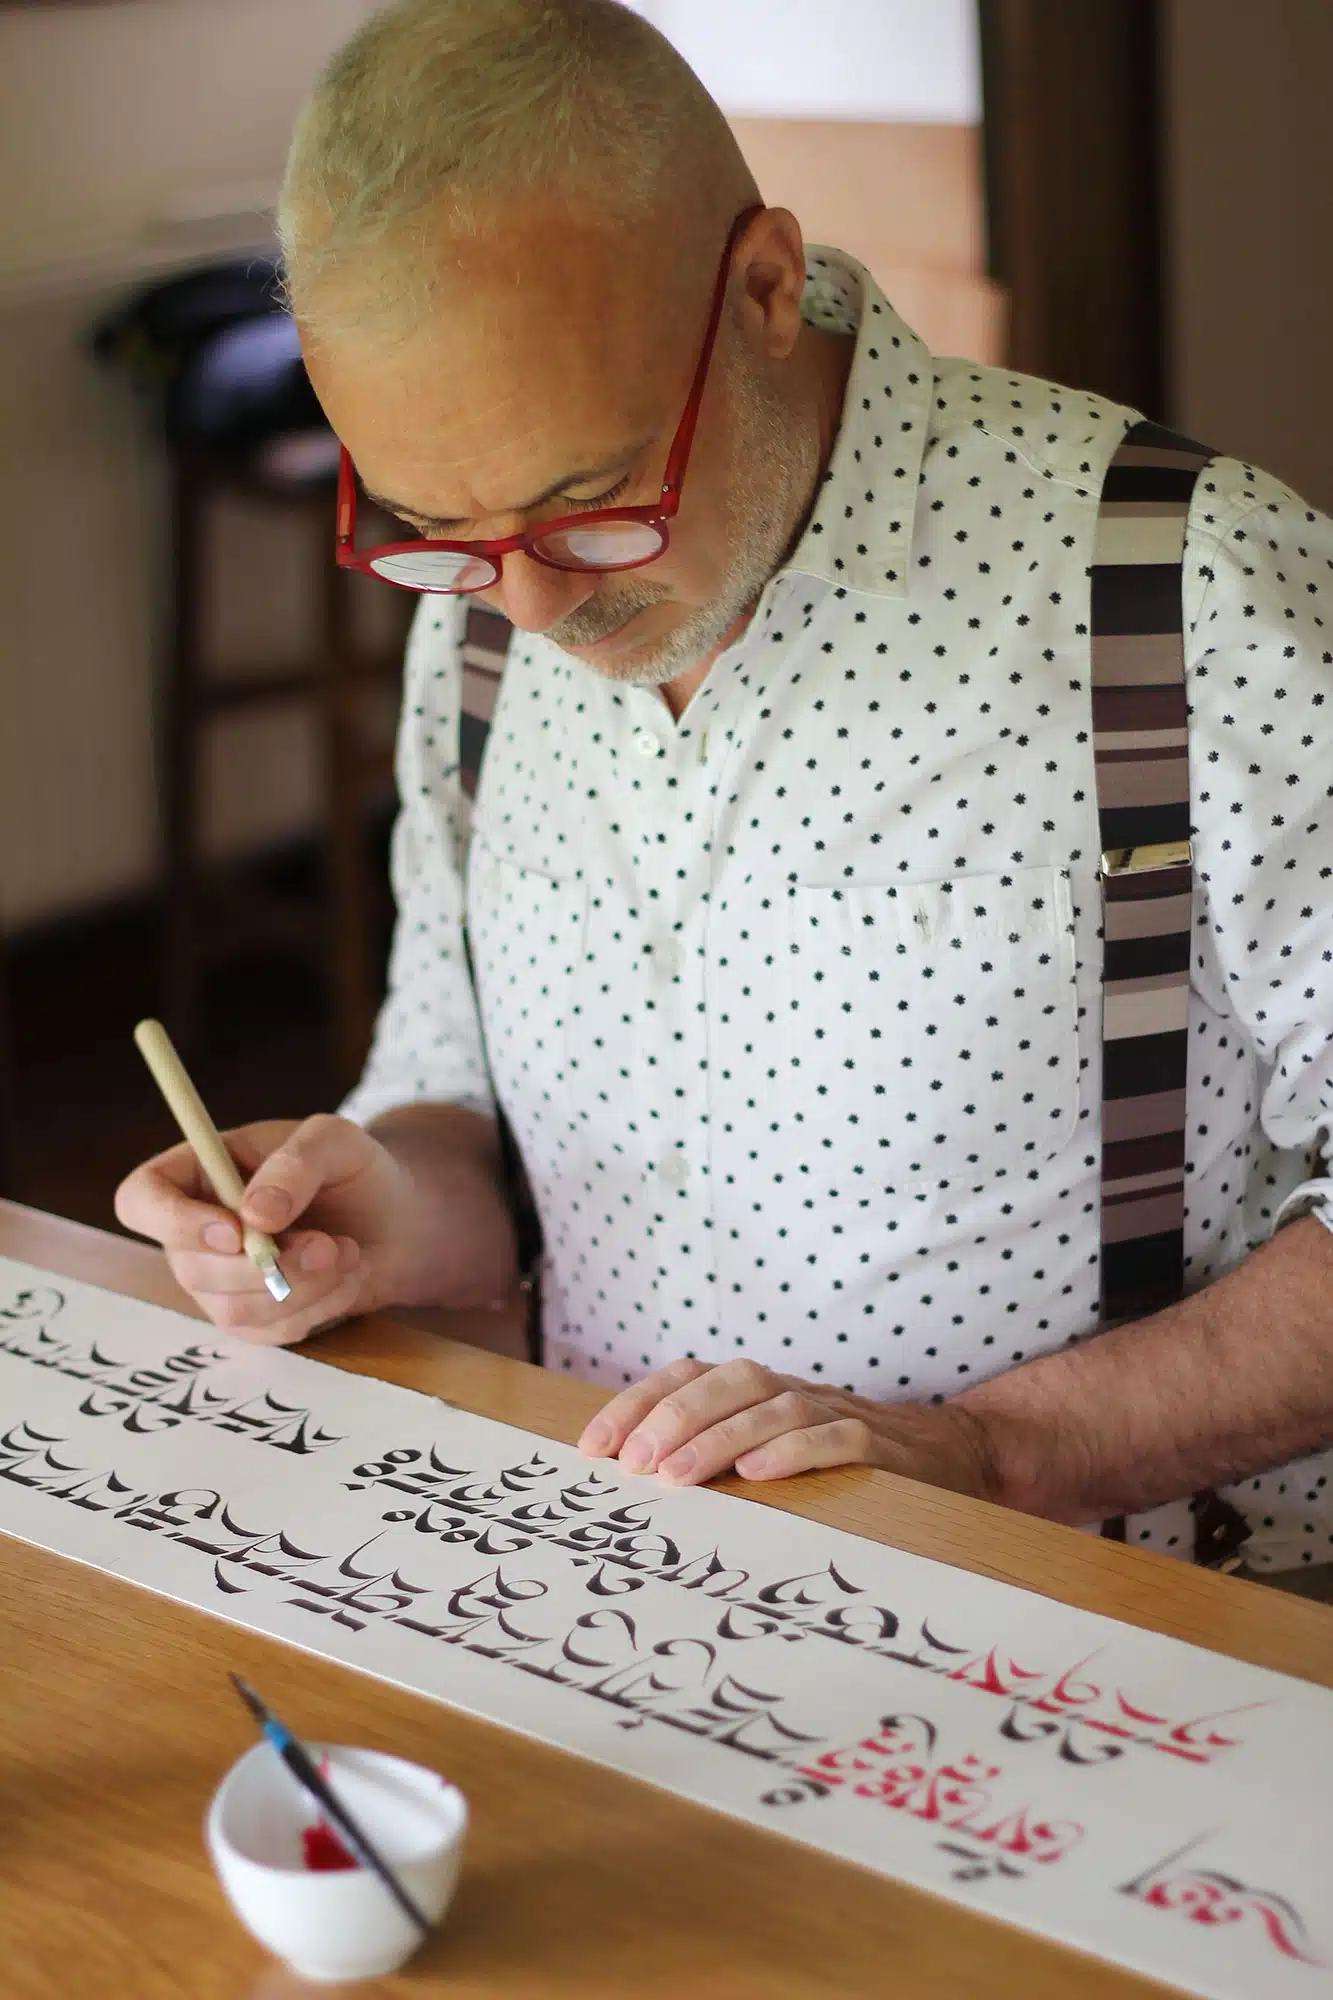 Participant of The 13th World Calligraphy Jeonbuk Biennale in South Korea.